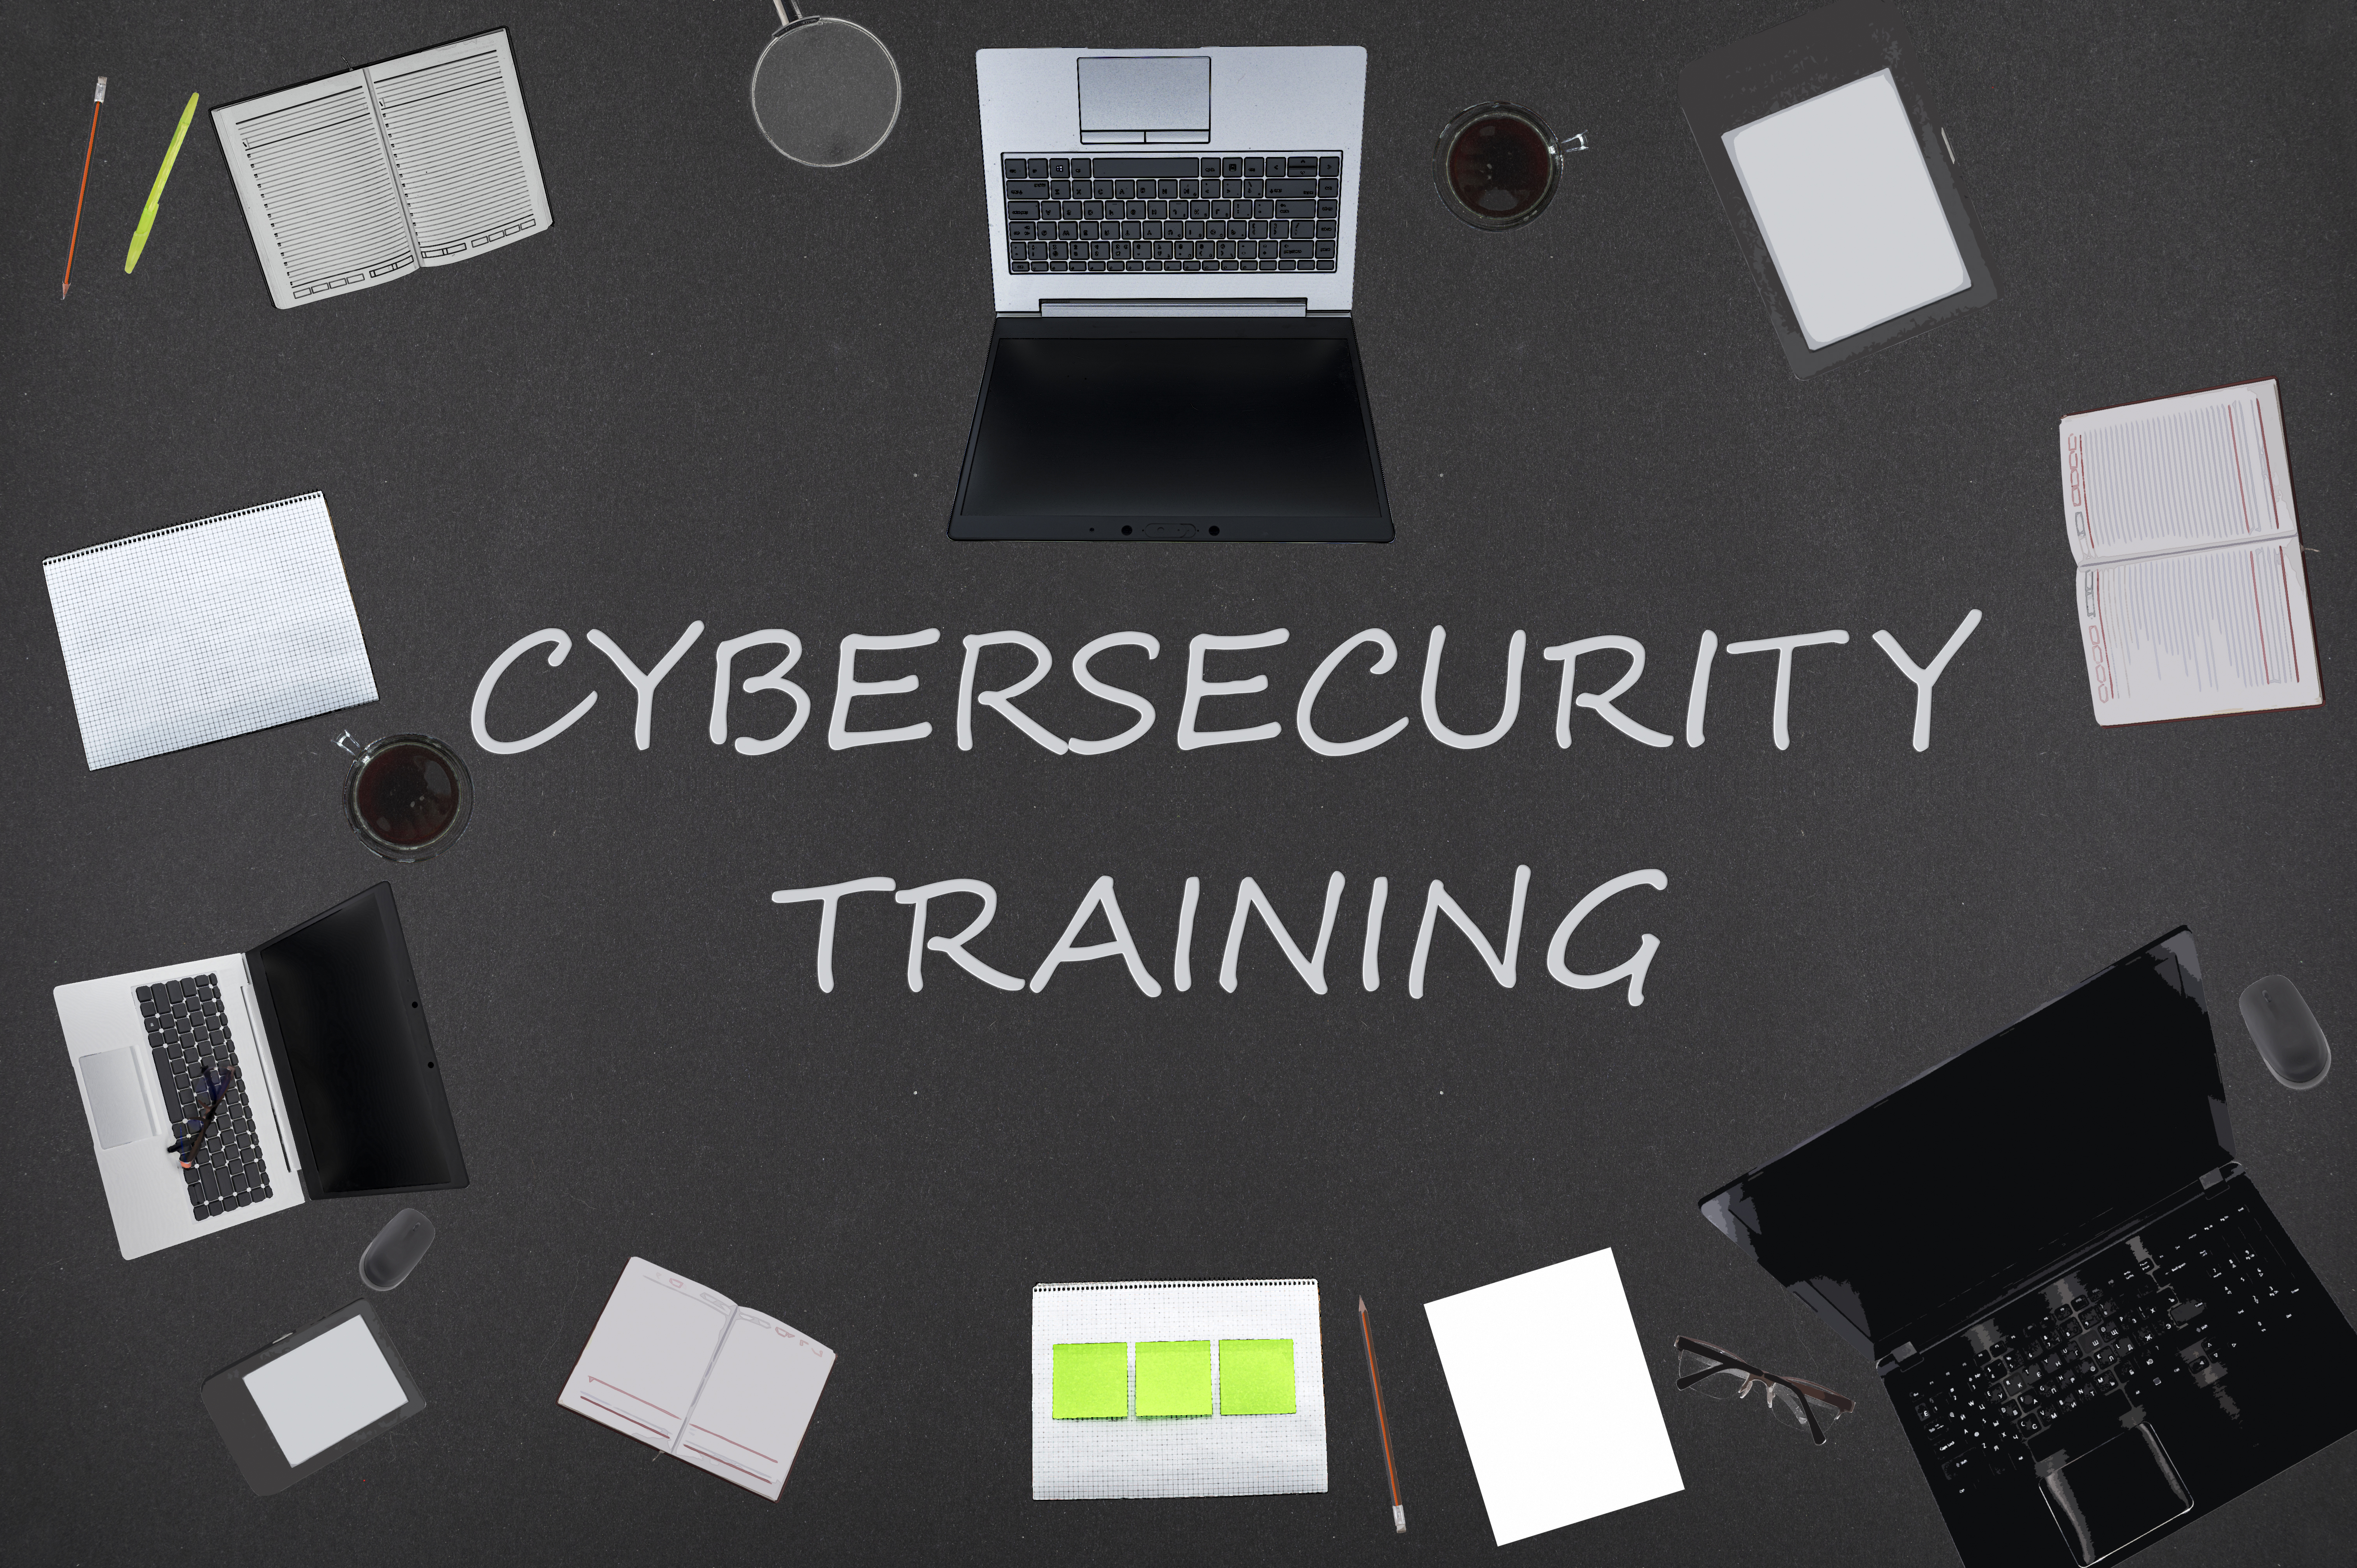 Cyber Security training image